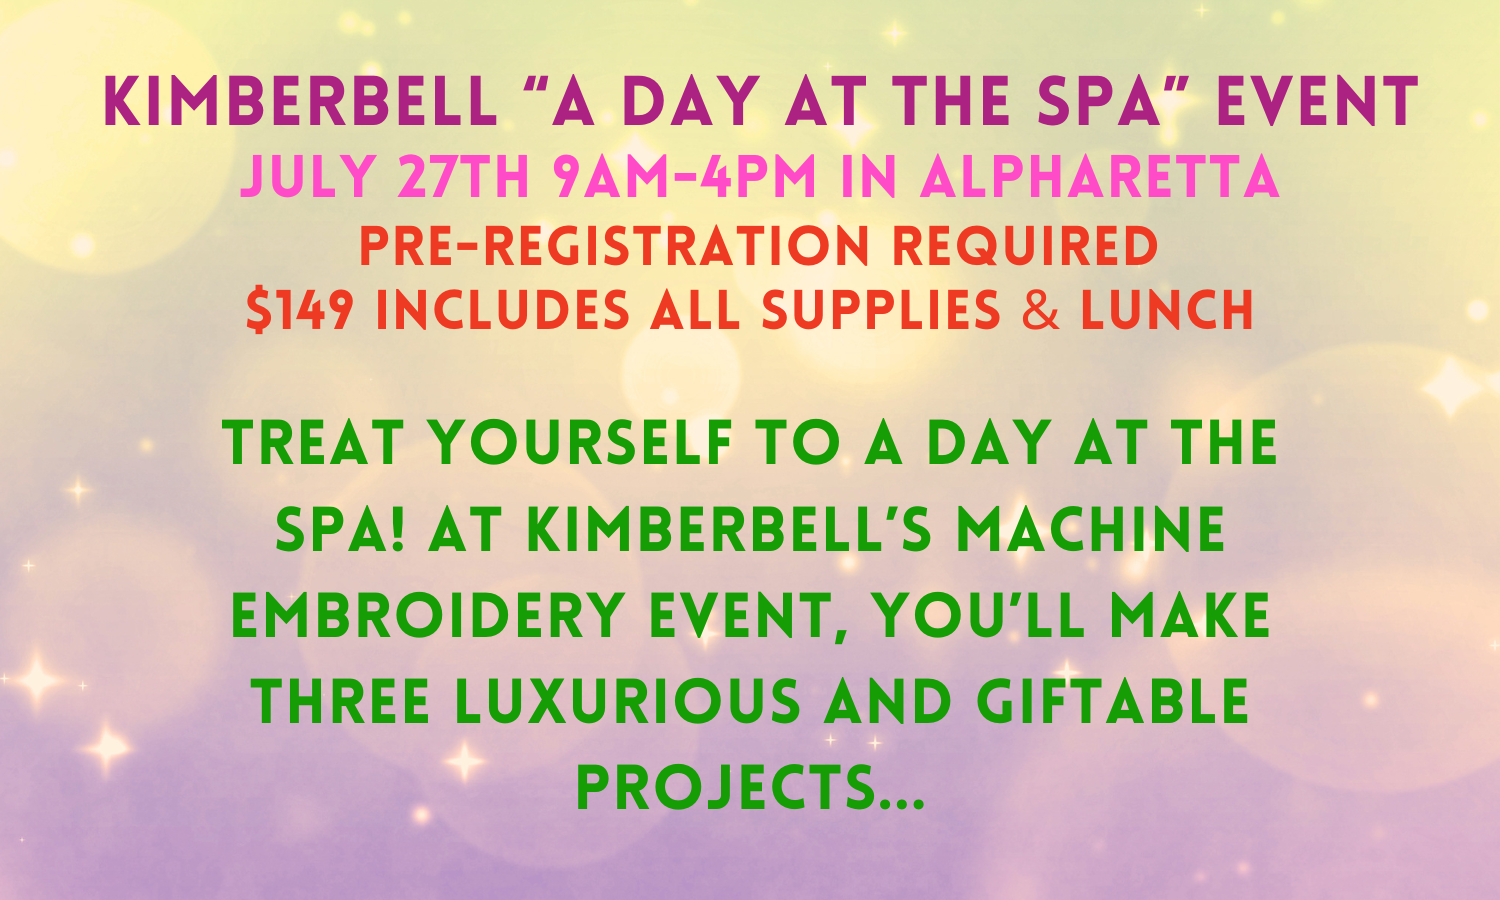 Kimberbell “A Day At The Spa” 7/27 Event